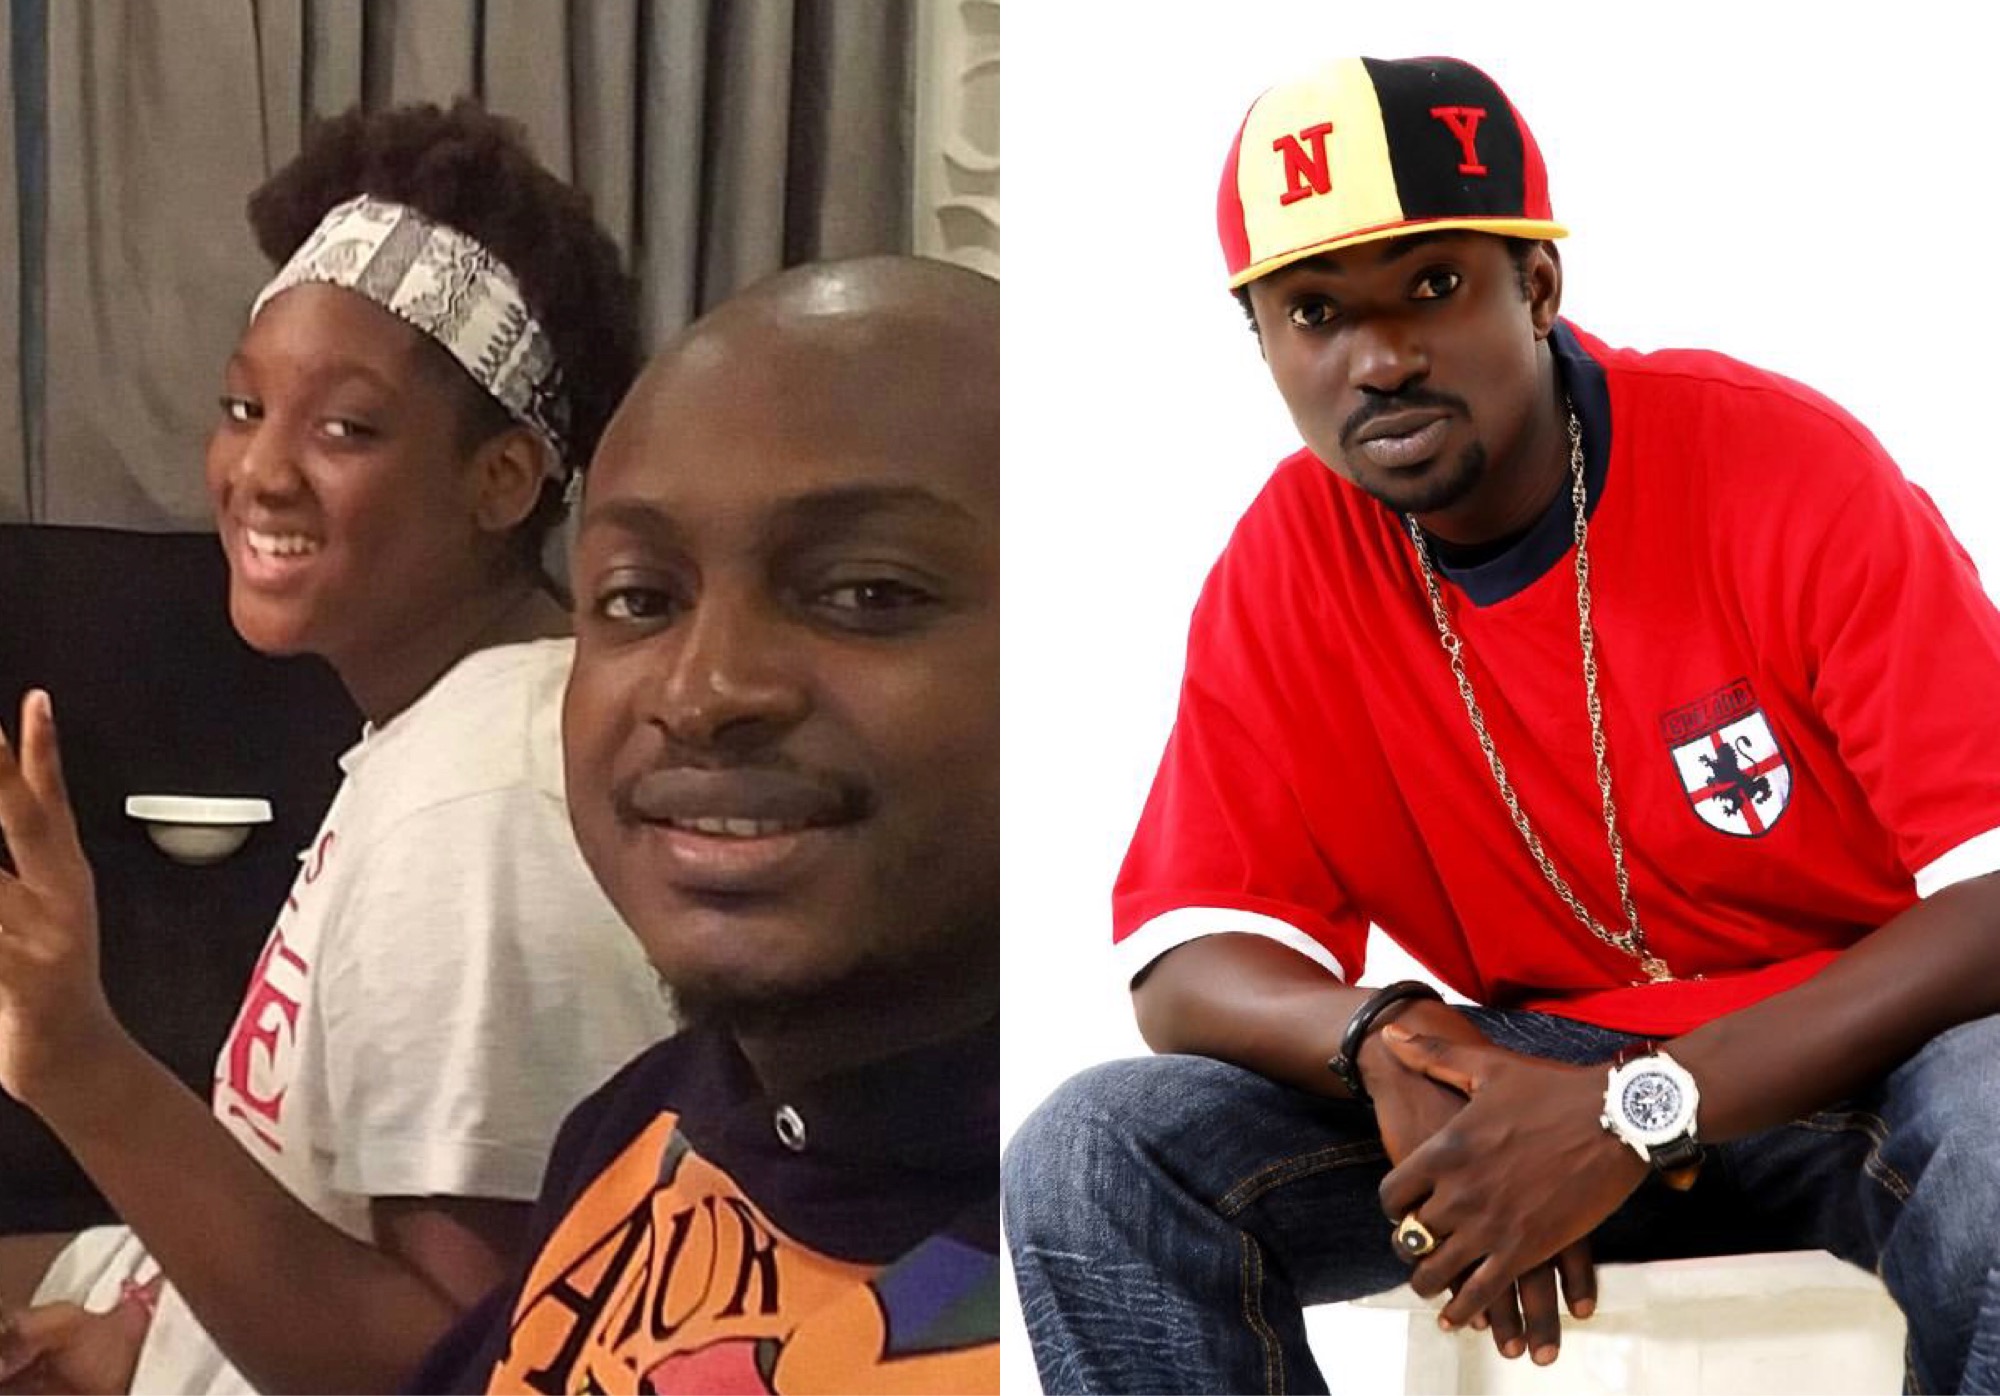 “Your Obsession With 2Face Will Be Your Death” – 2Face’s Brother Slams Blackface